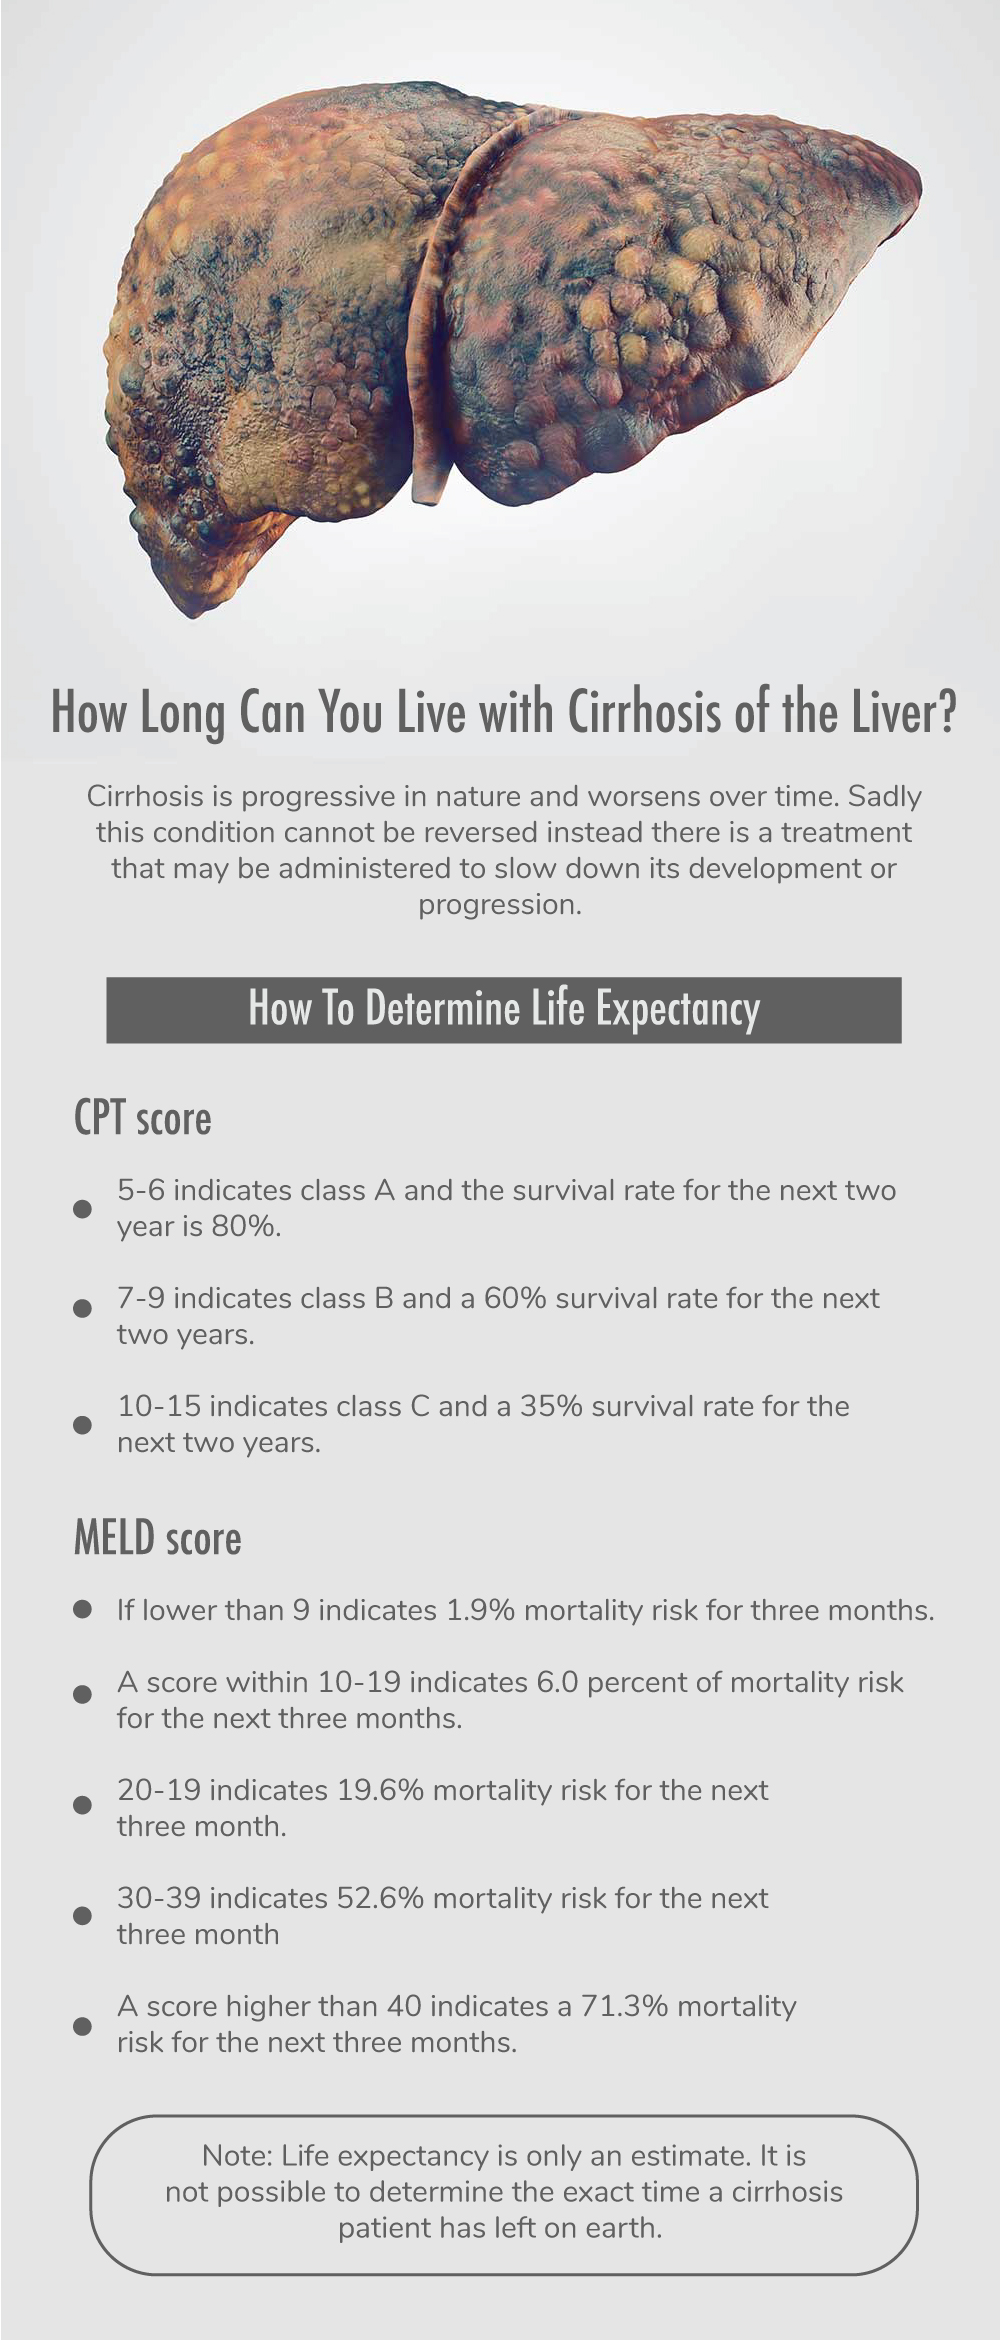 How Long Can You Live with Cirrhosis of the Liver?